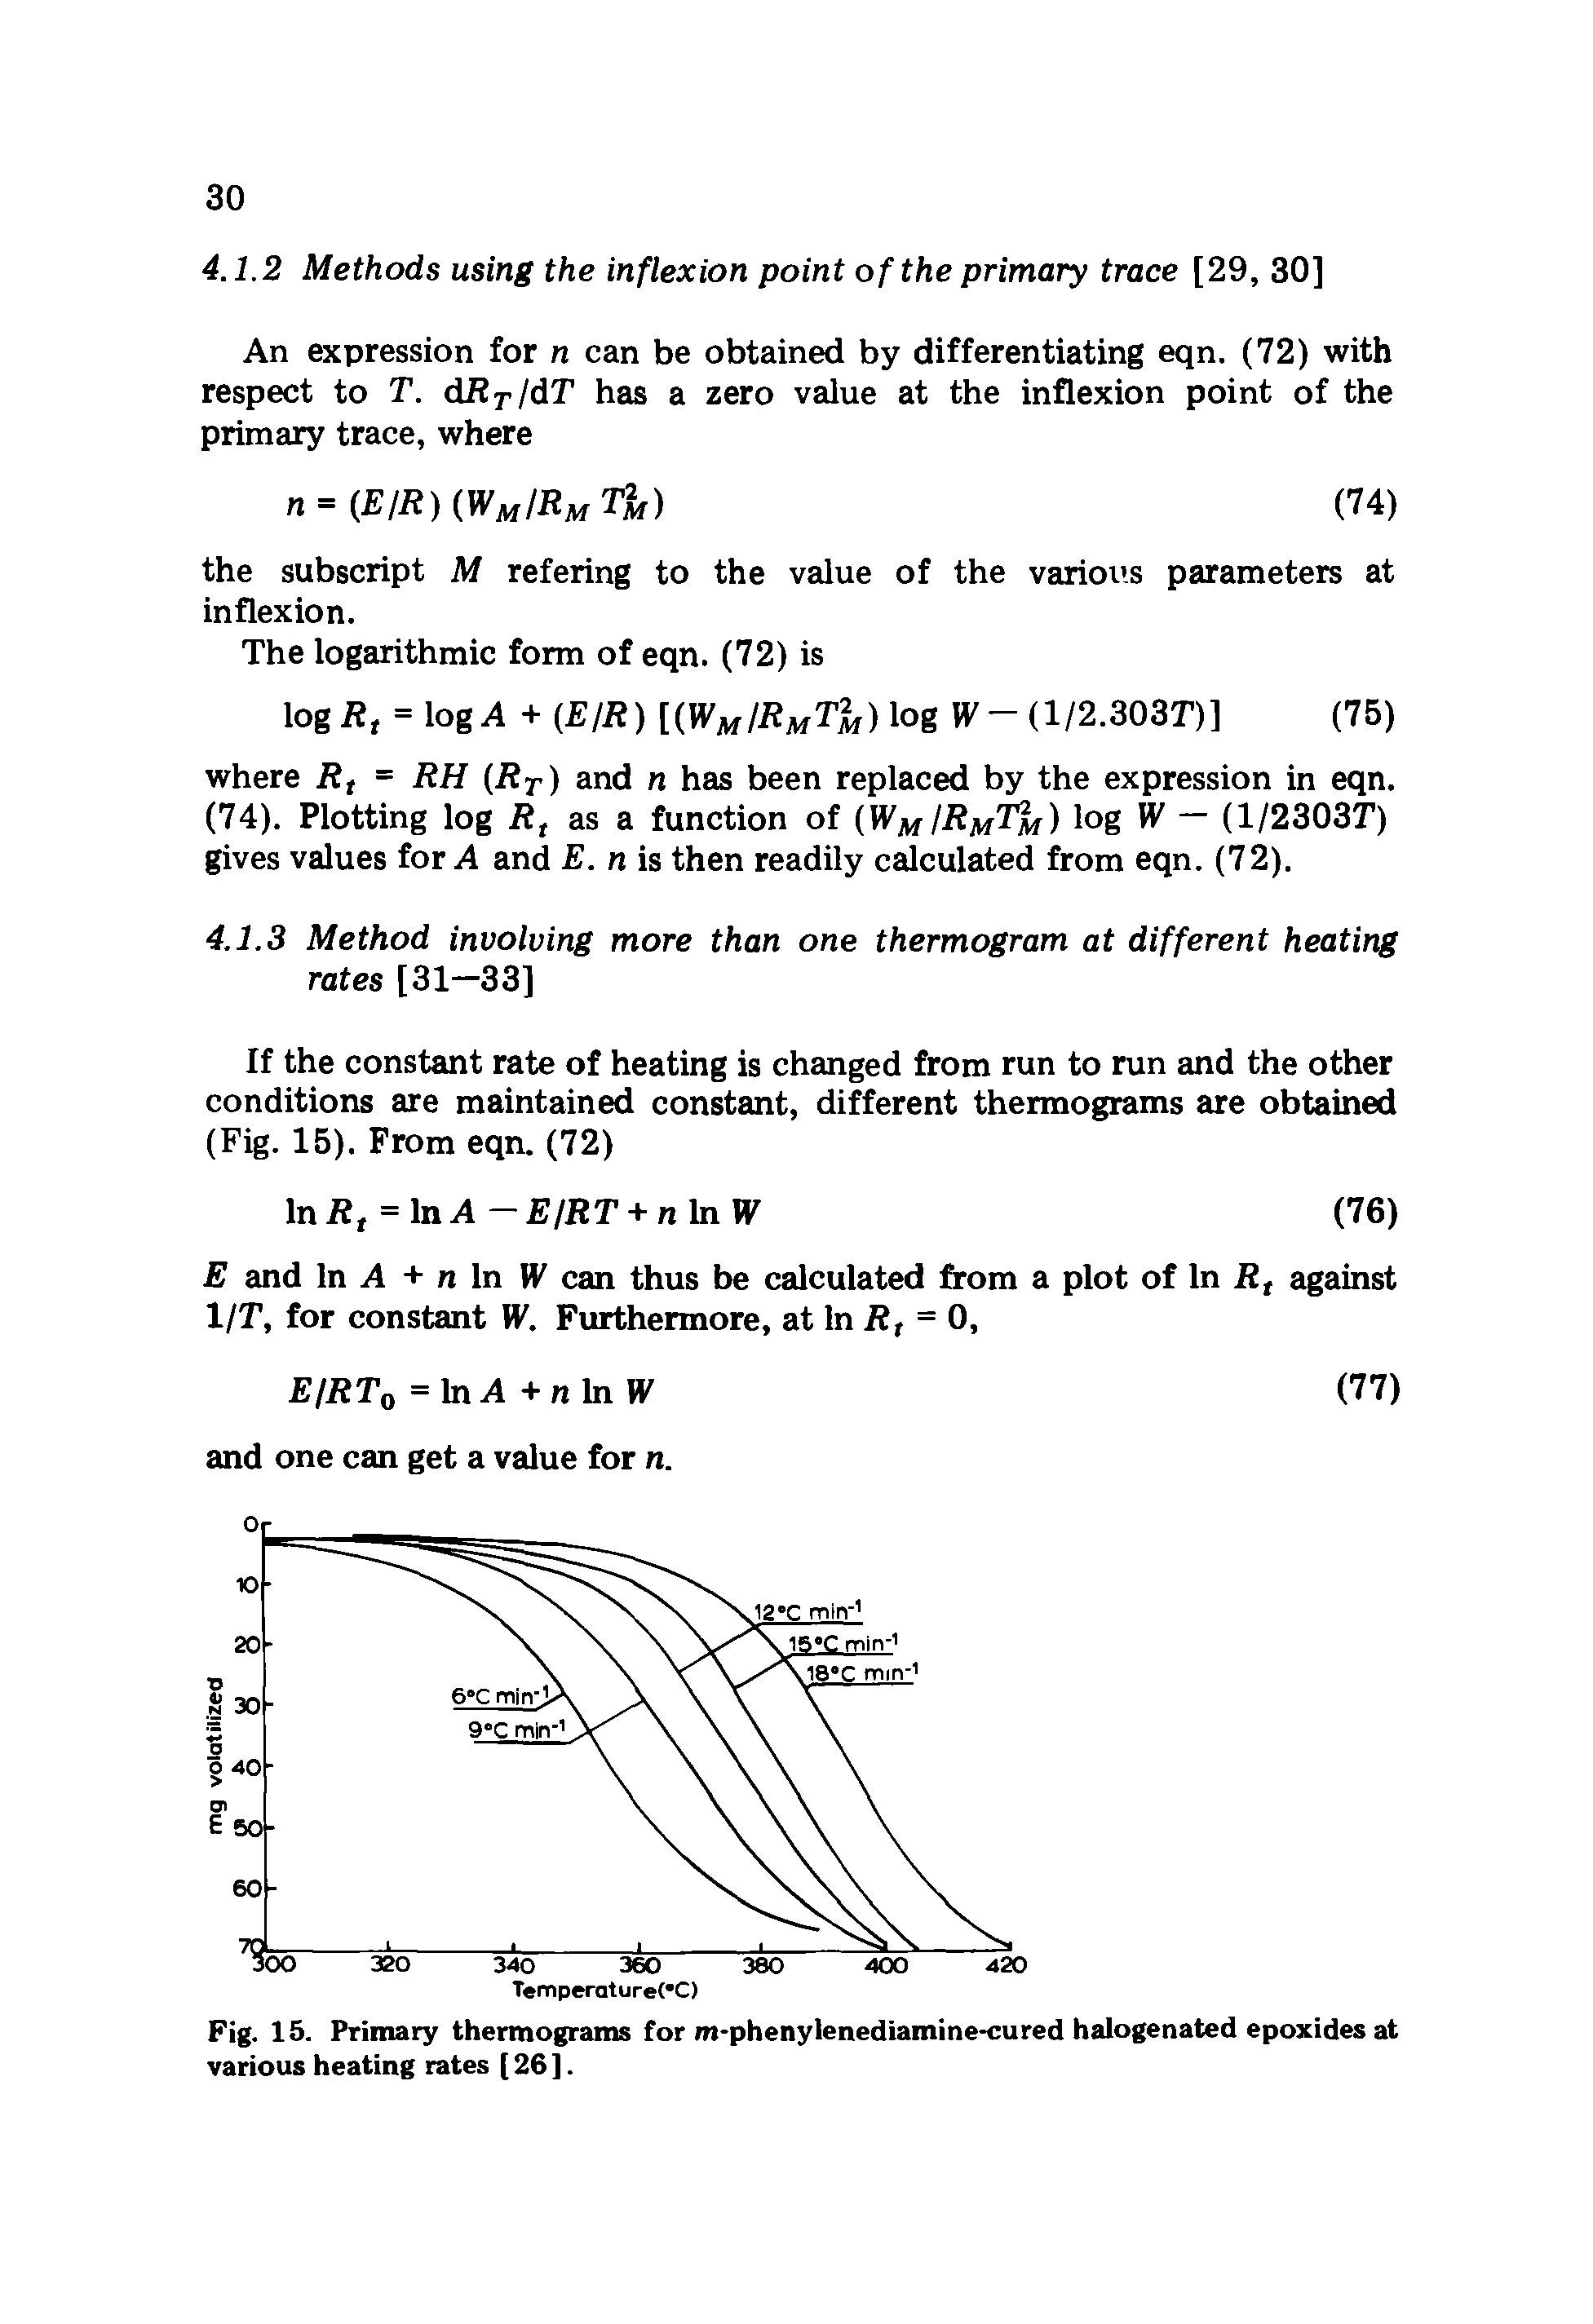 Fig. 15. Primary thermograms for m-phenylenediamine-cured halogenated epoxides at various heating rates (26 ].